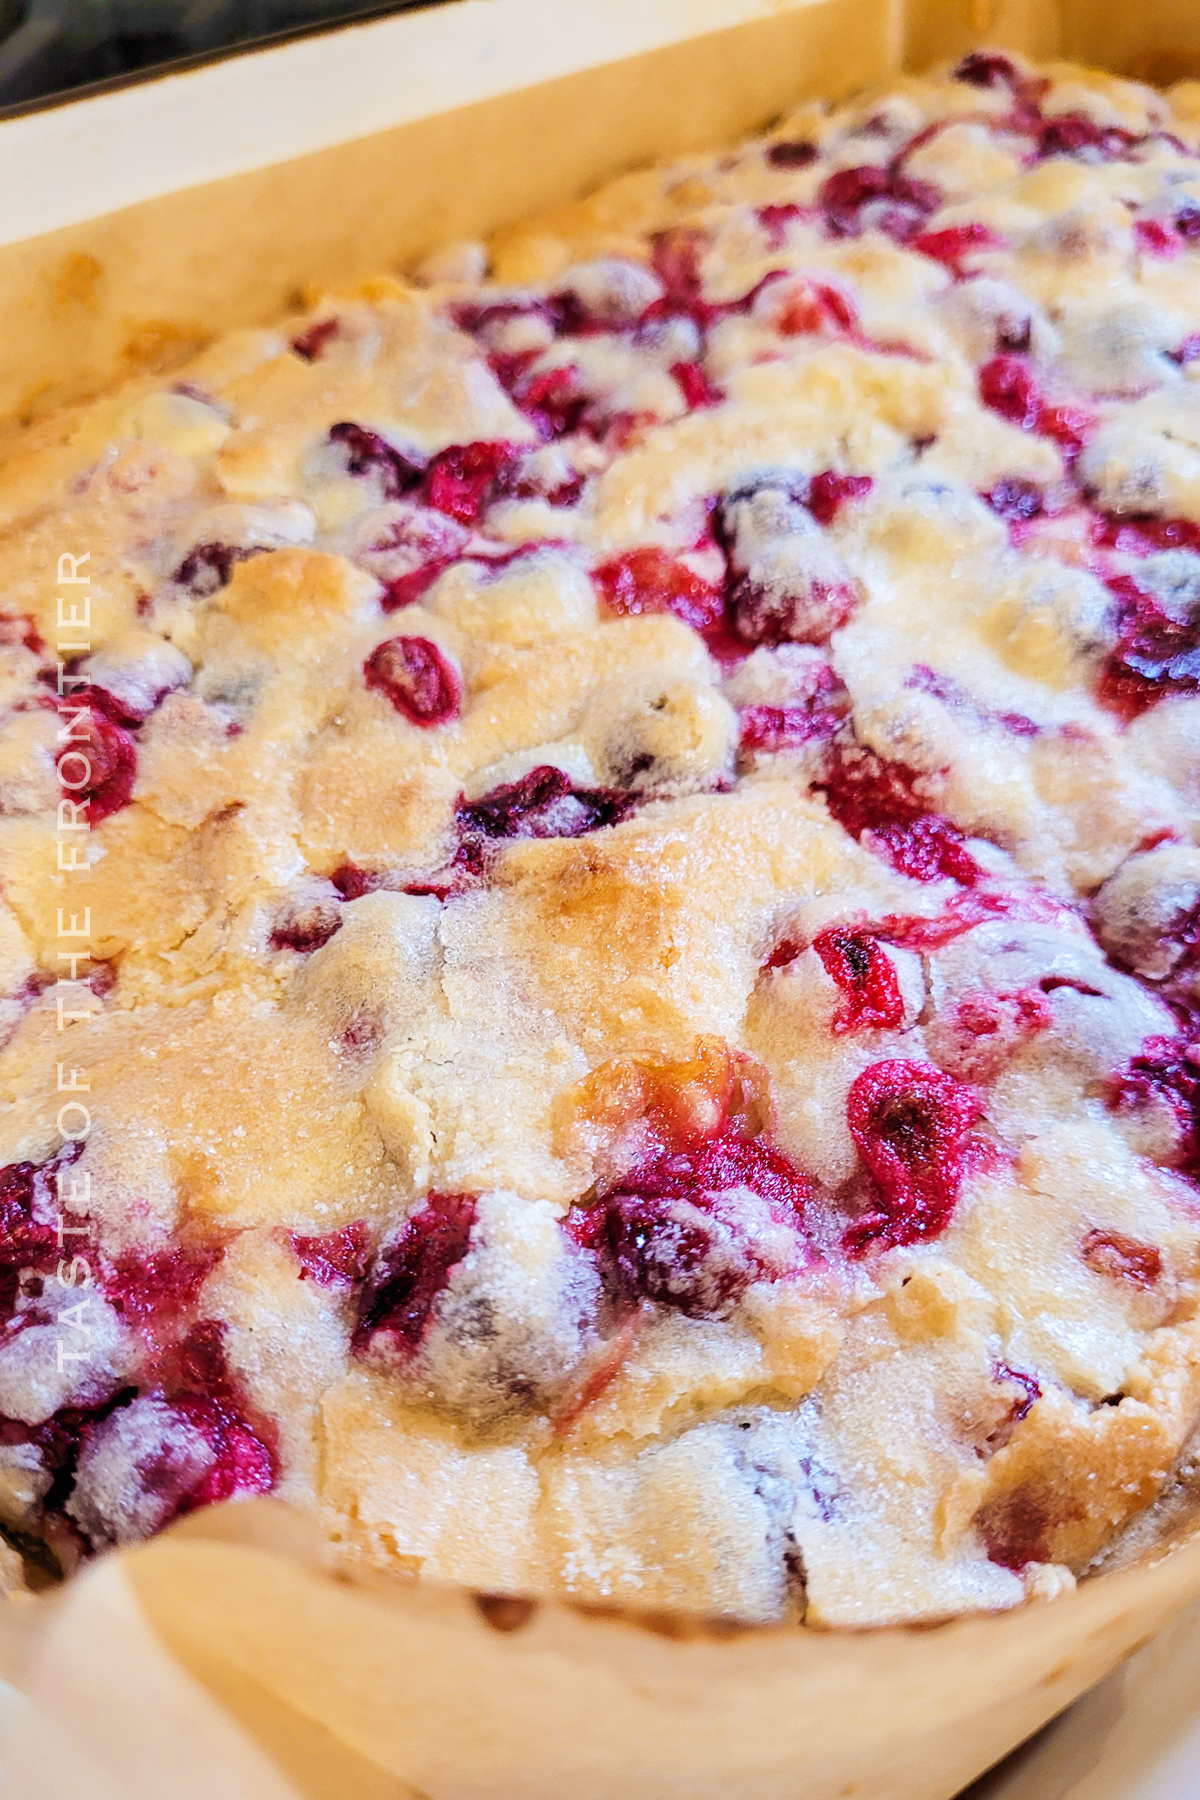 baked cake with cranberries